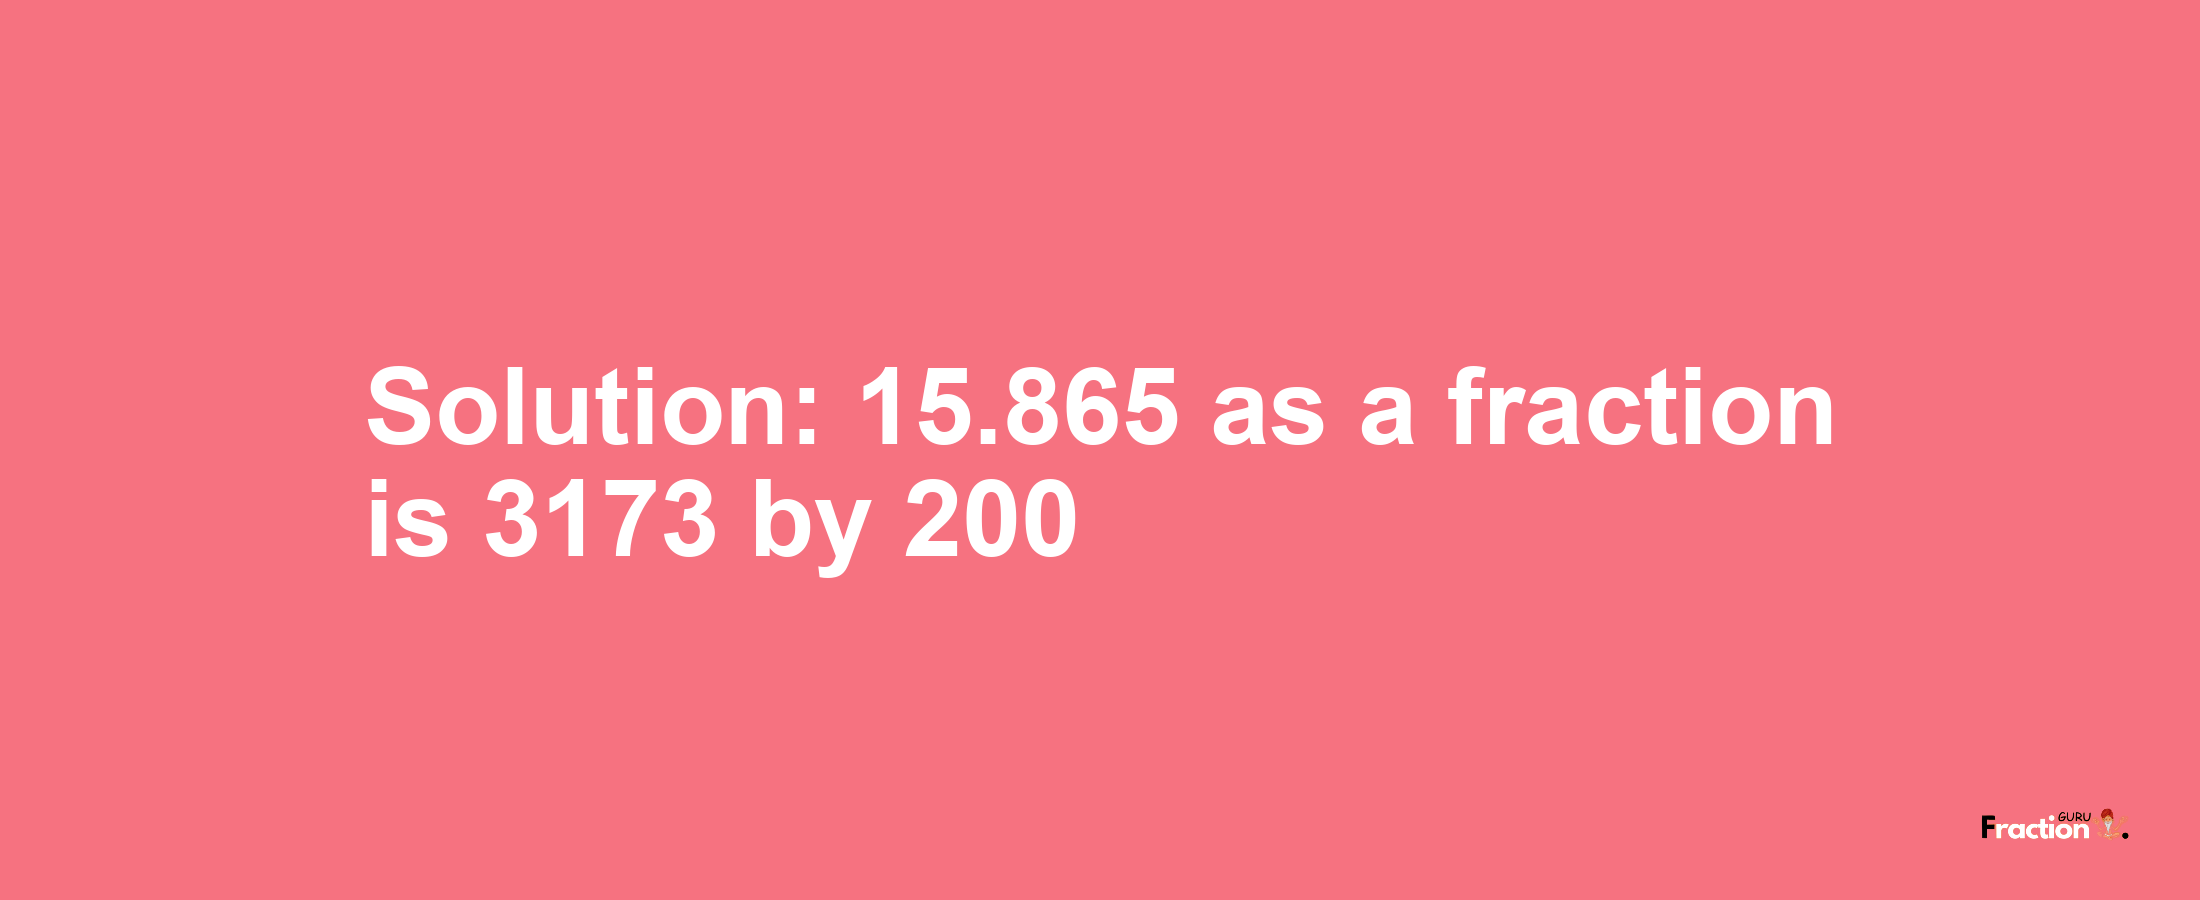 Solution:15.865 as a fraction is 3173/200